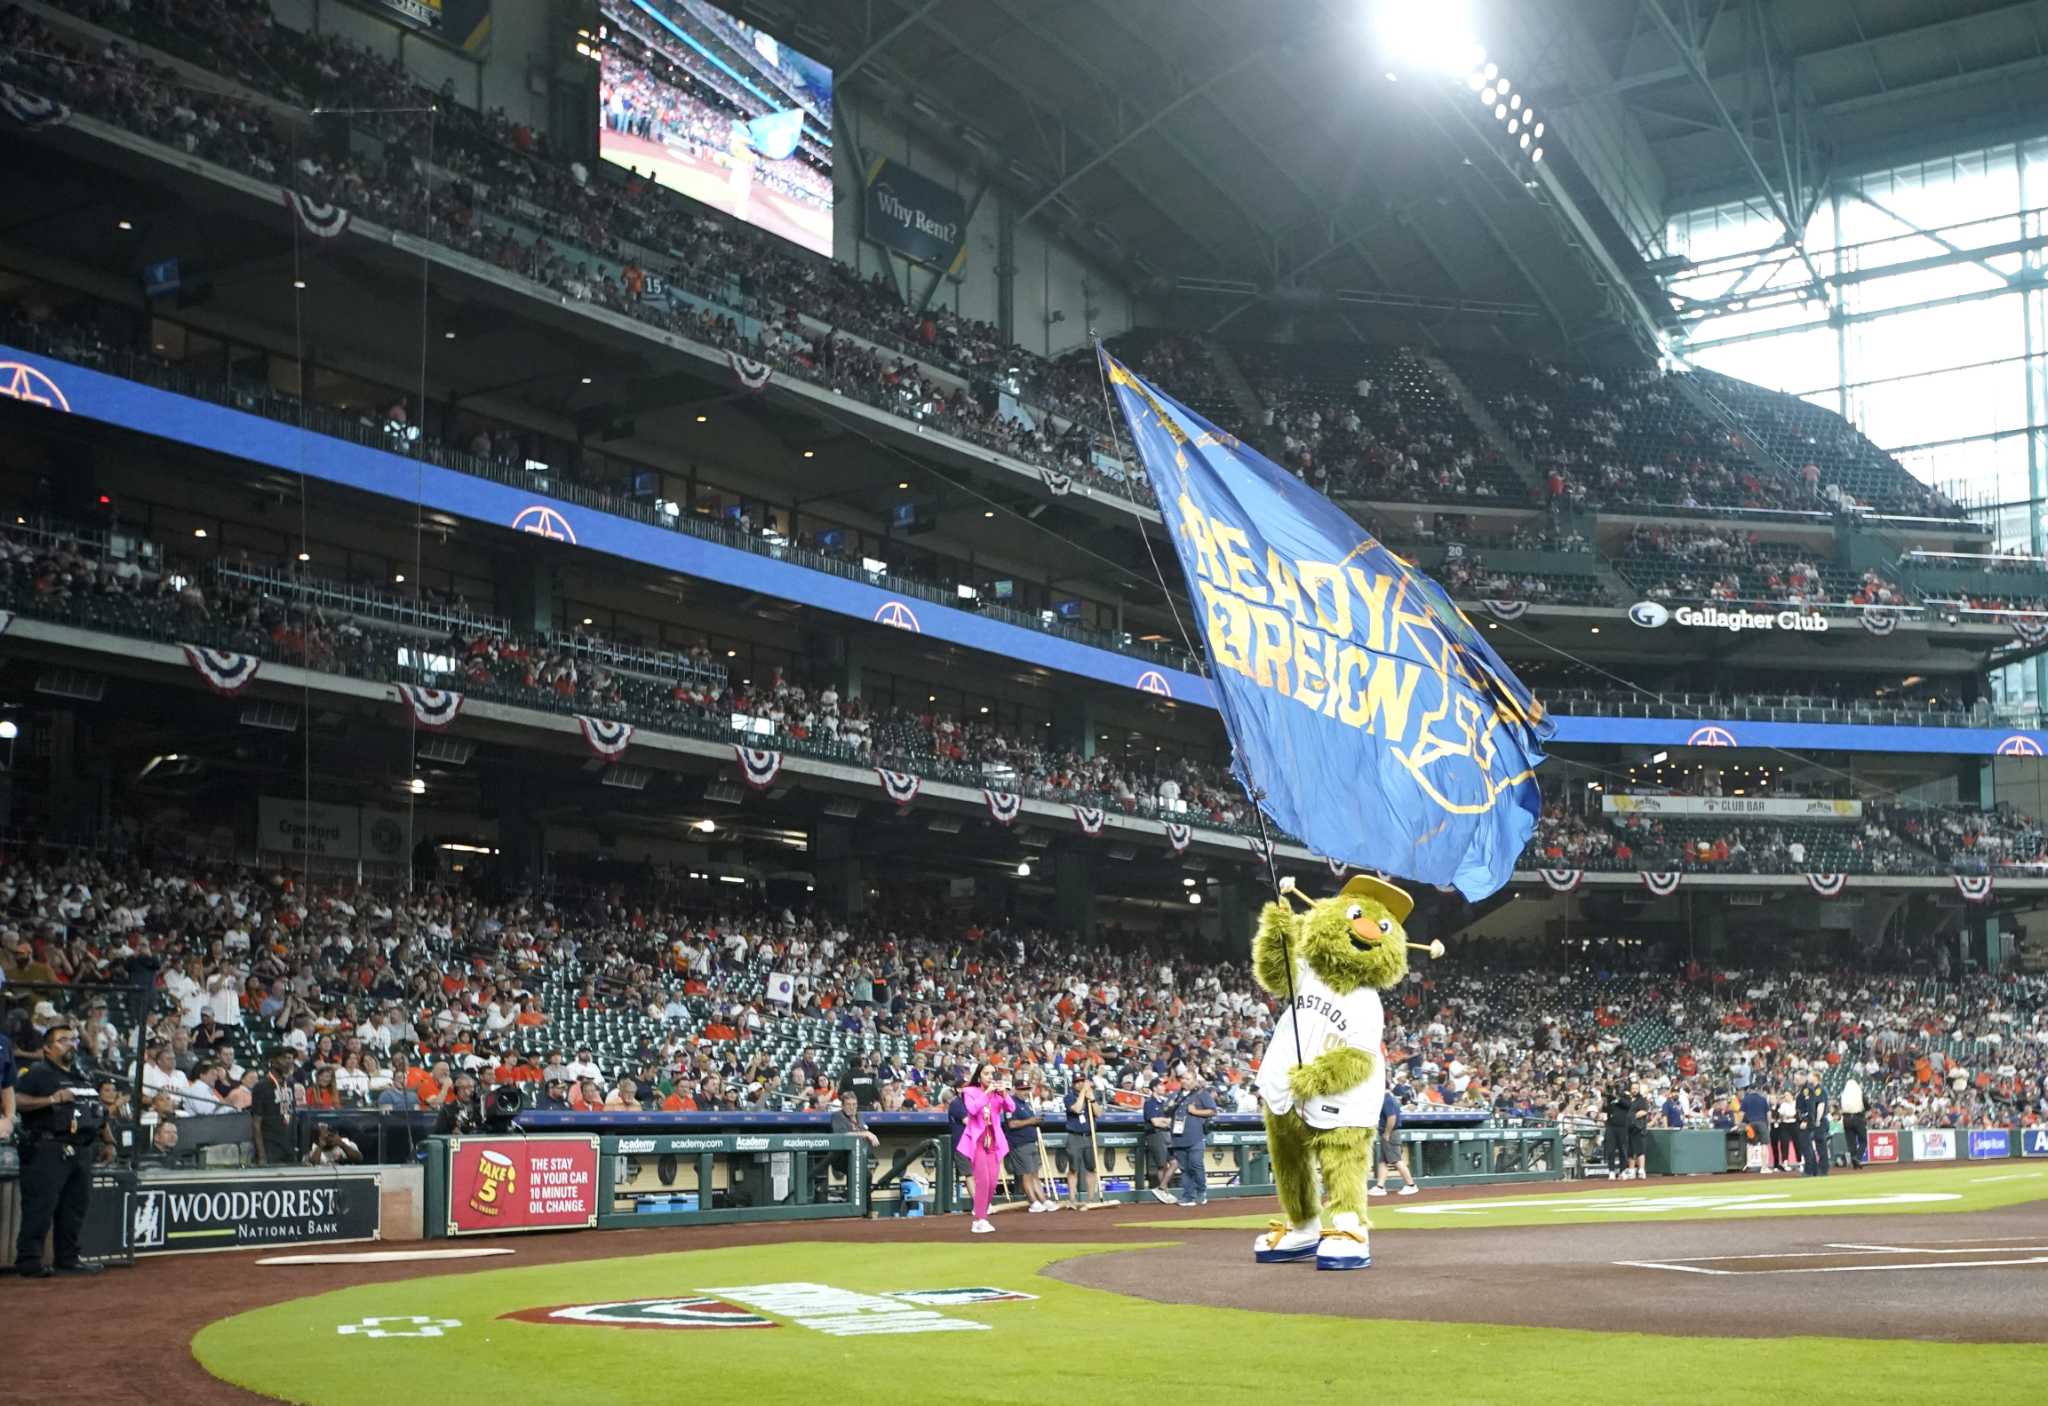 Ready to reign: Astros baseball is back!